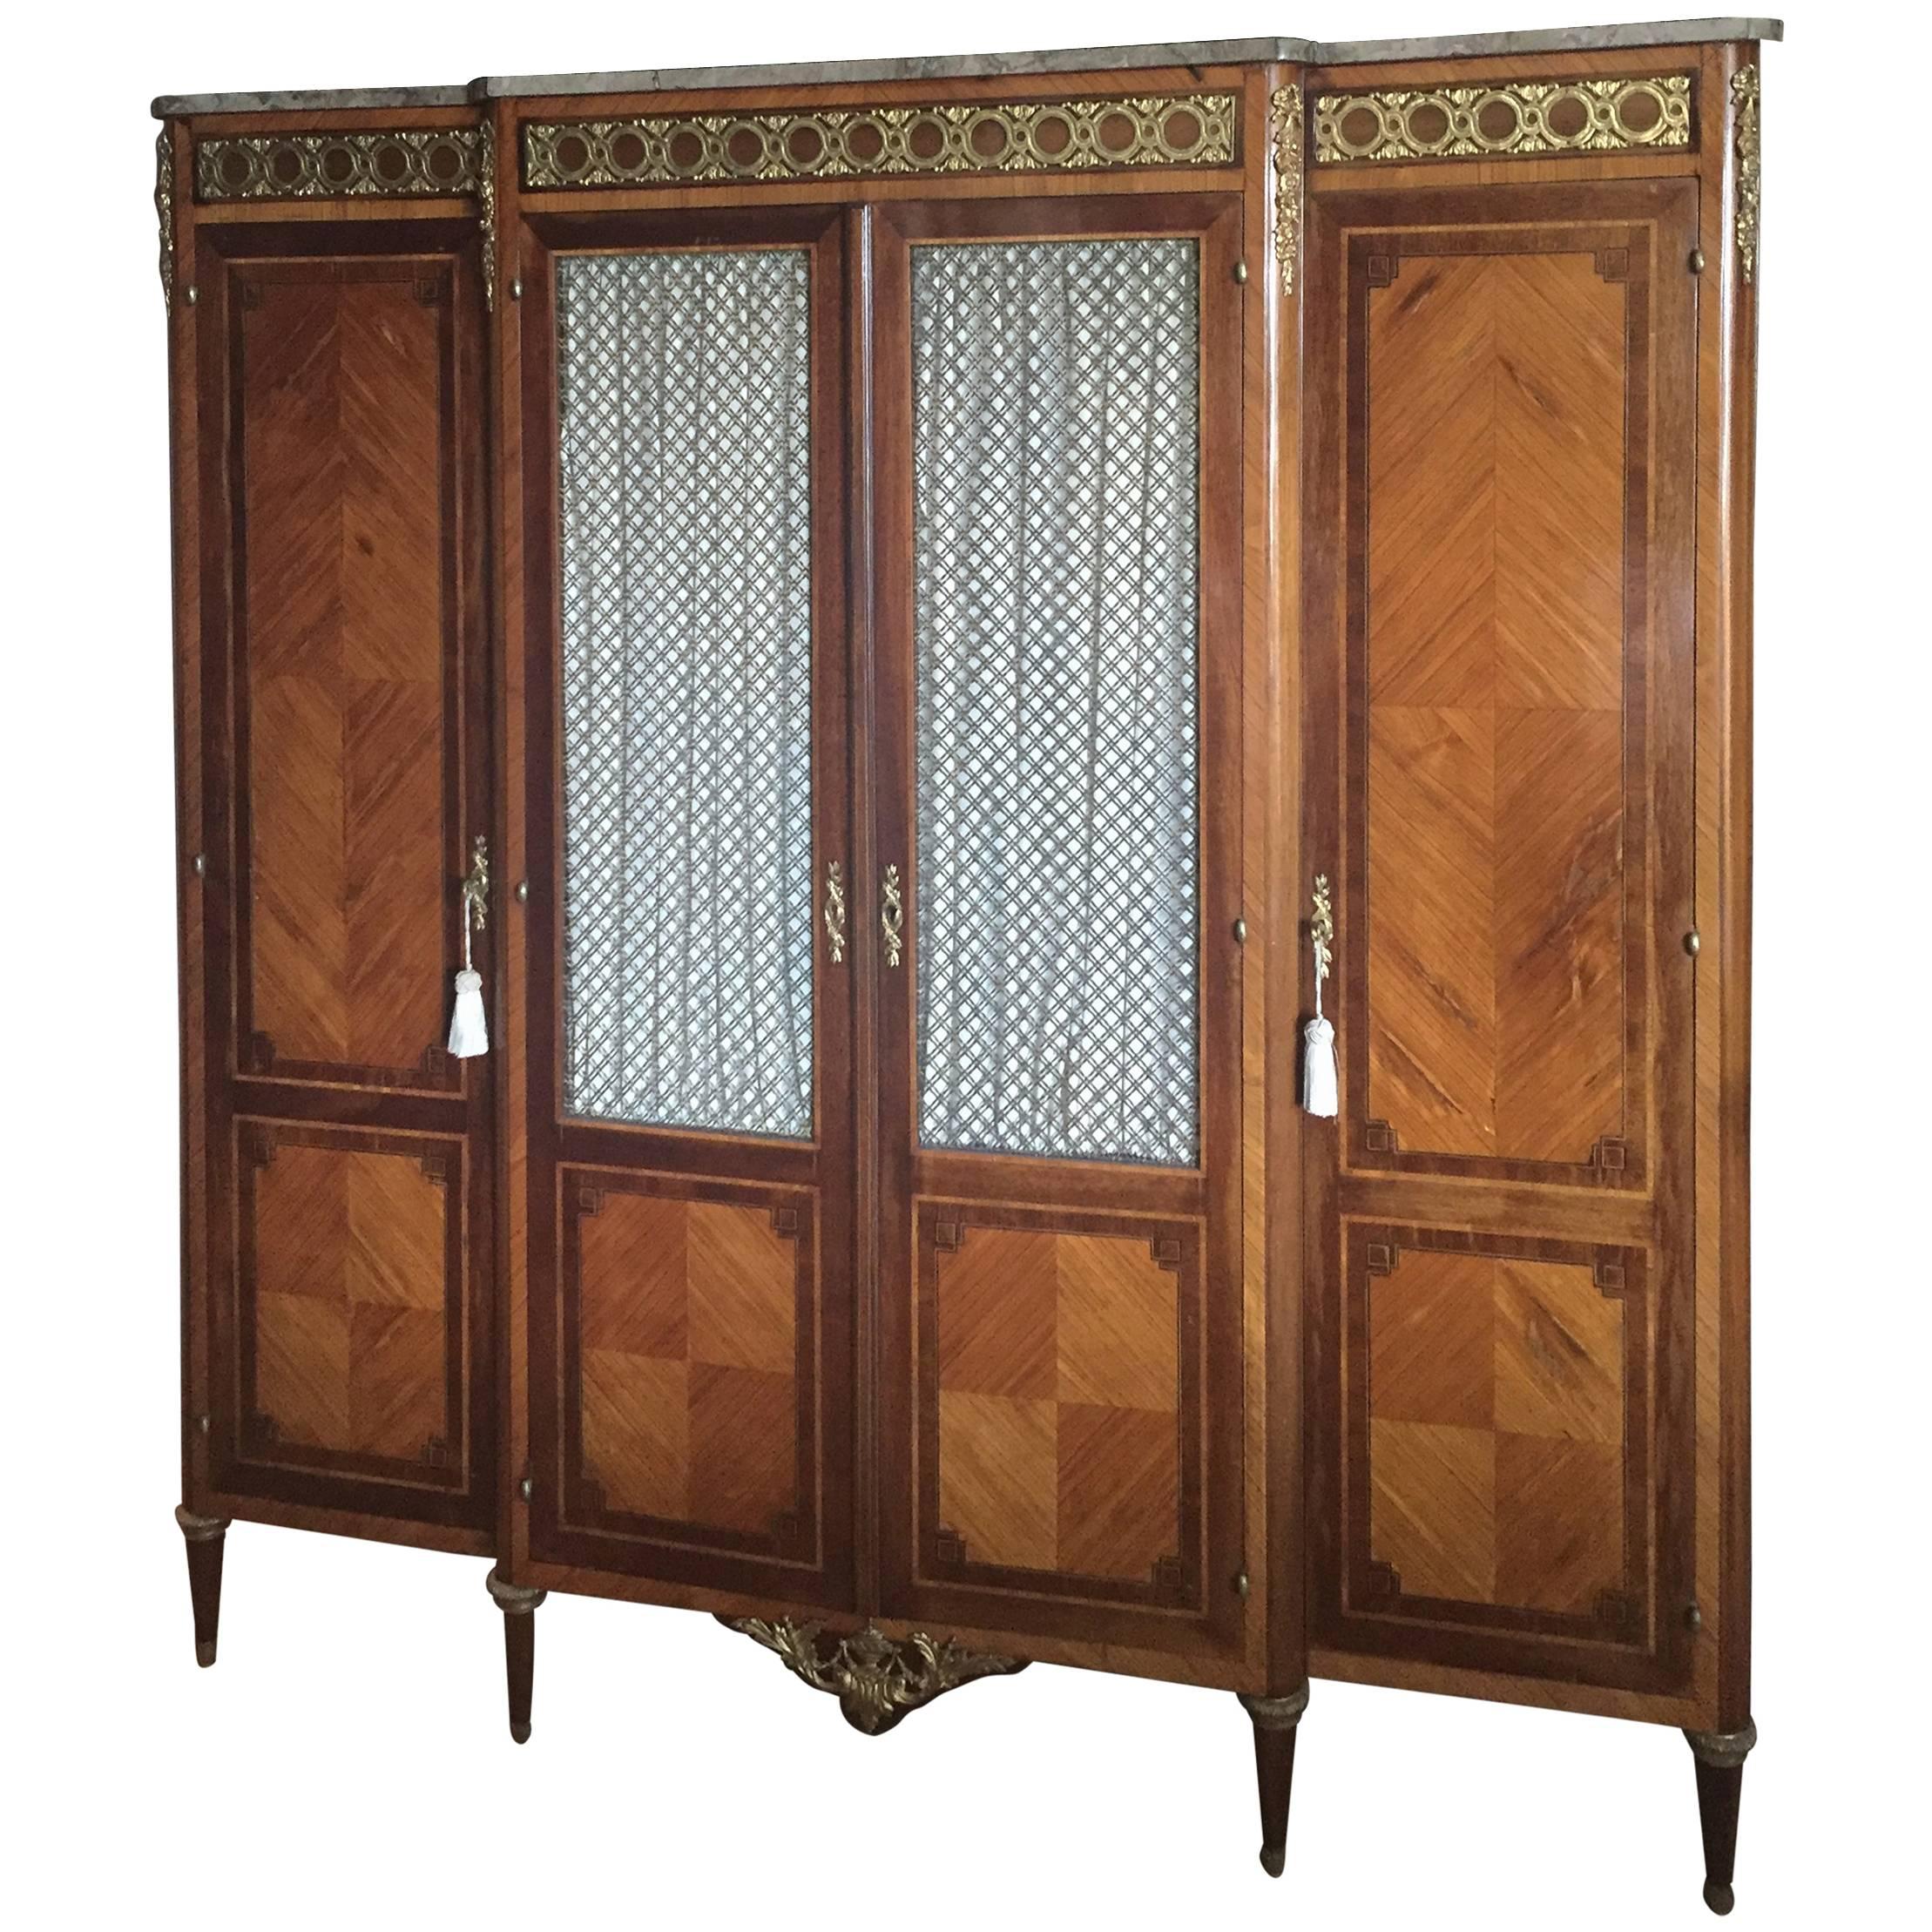 We have enjoyed this in our house for 15 years as a tv cabinet. We removed the back of the middle section only and as a wall piece it works great. The cabinet is wonderful quality of breakfront form with beautiful Marquetry work and gilt bronze